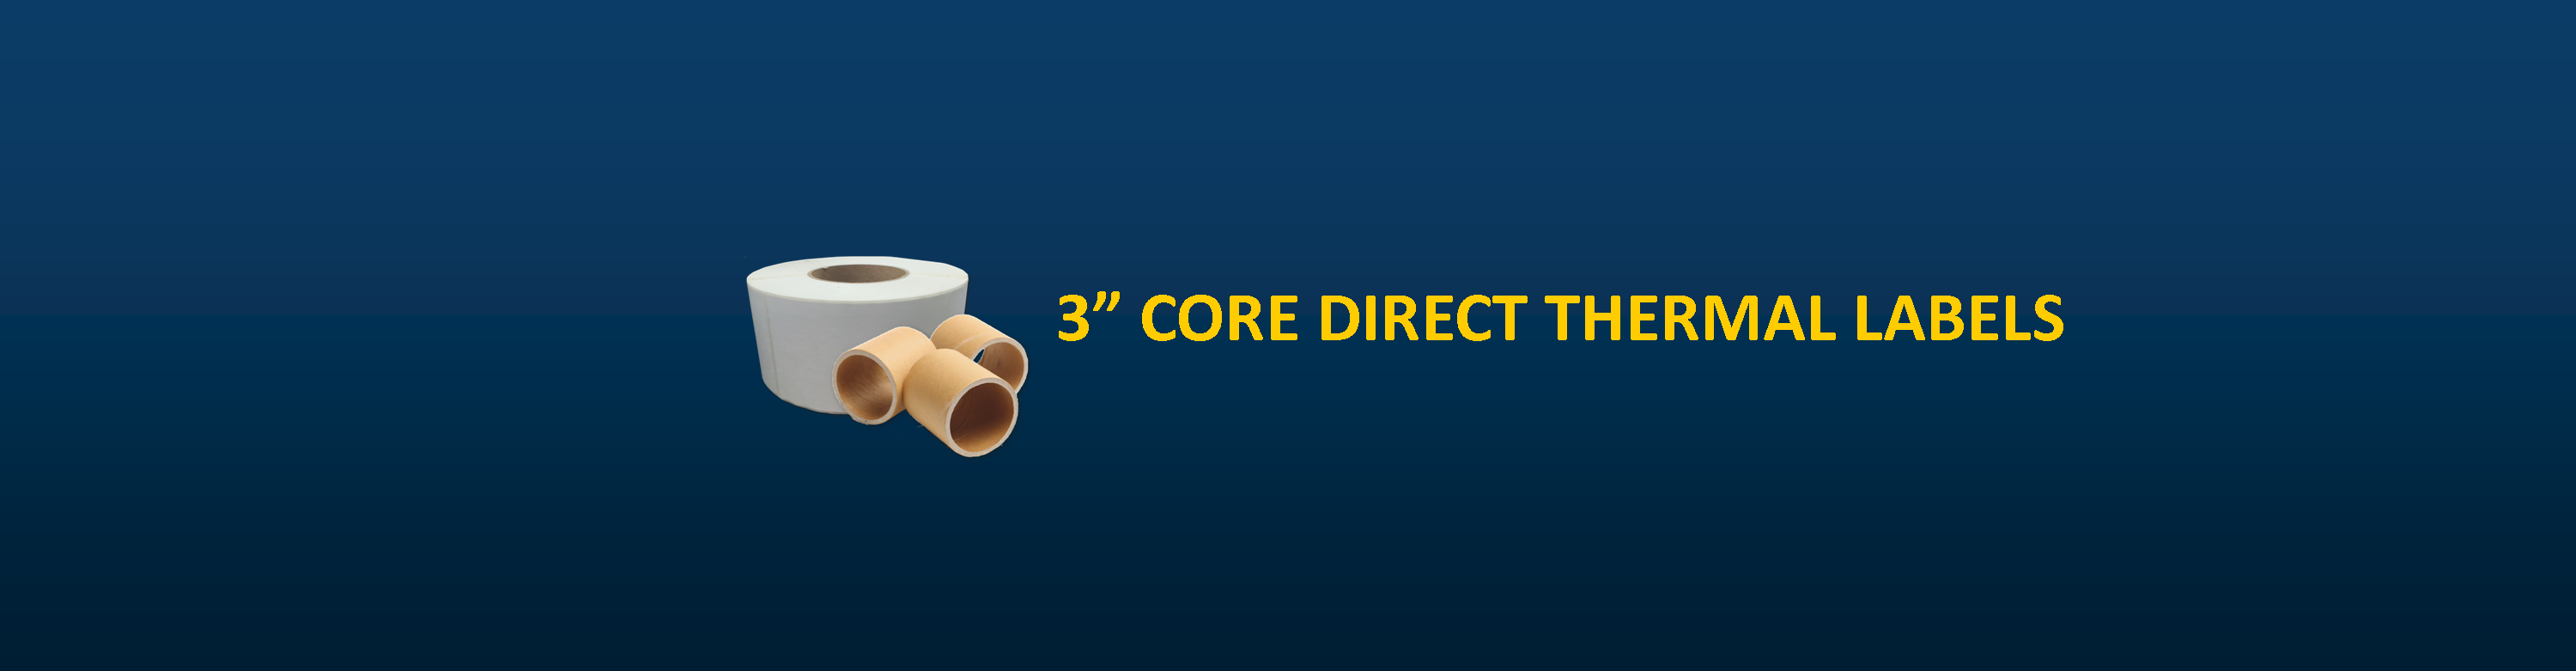 Direct Thermal on 3" Core